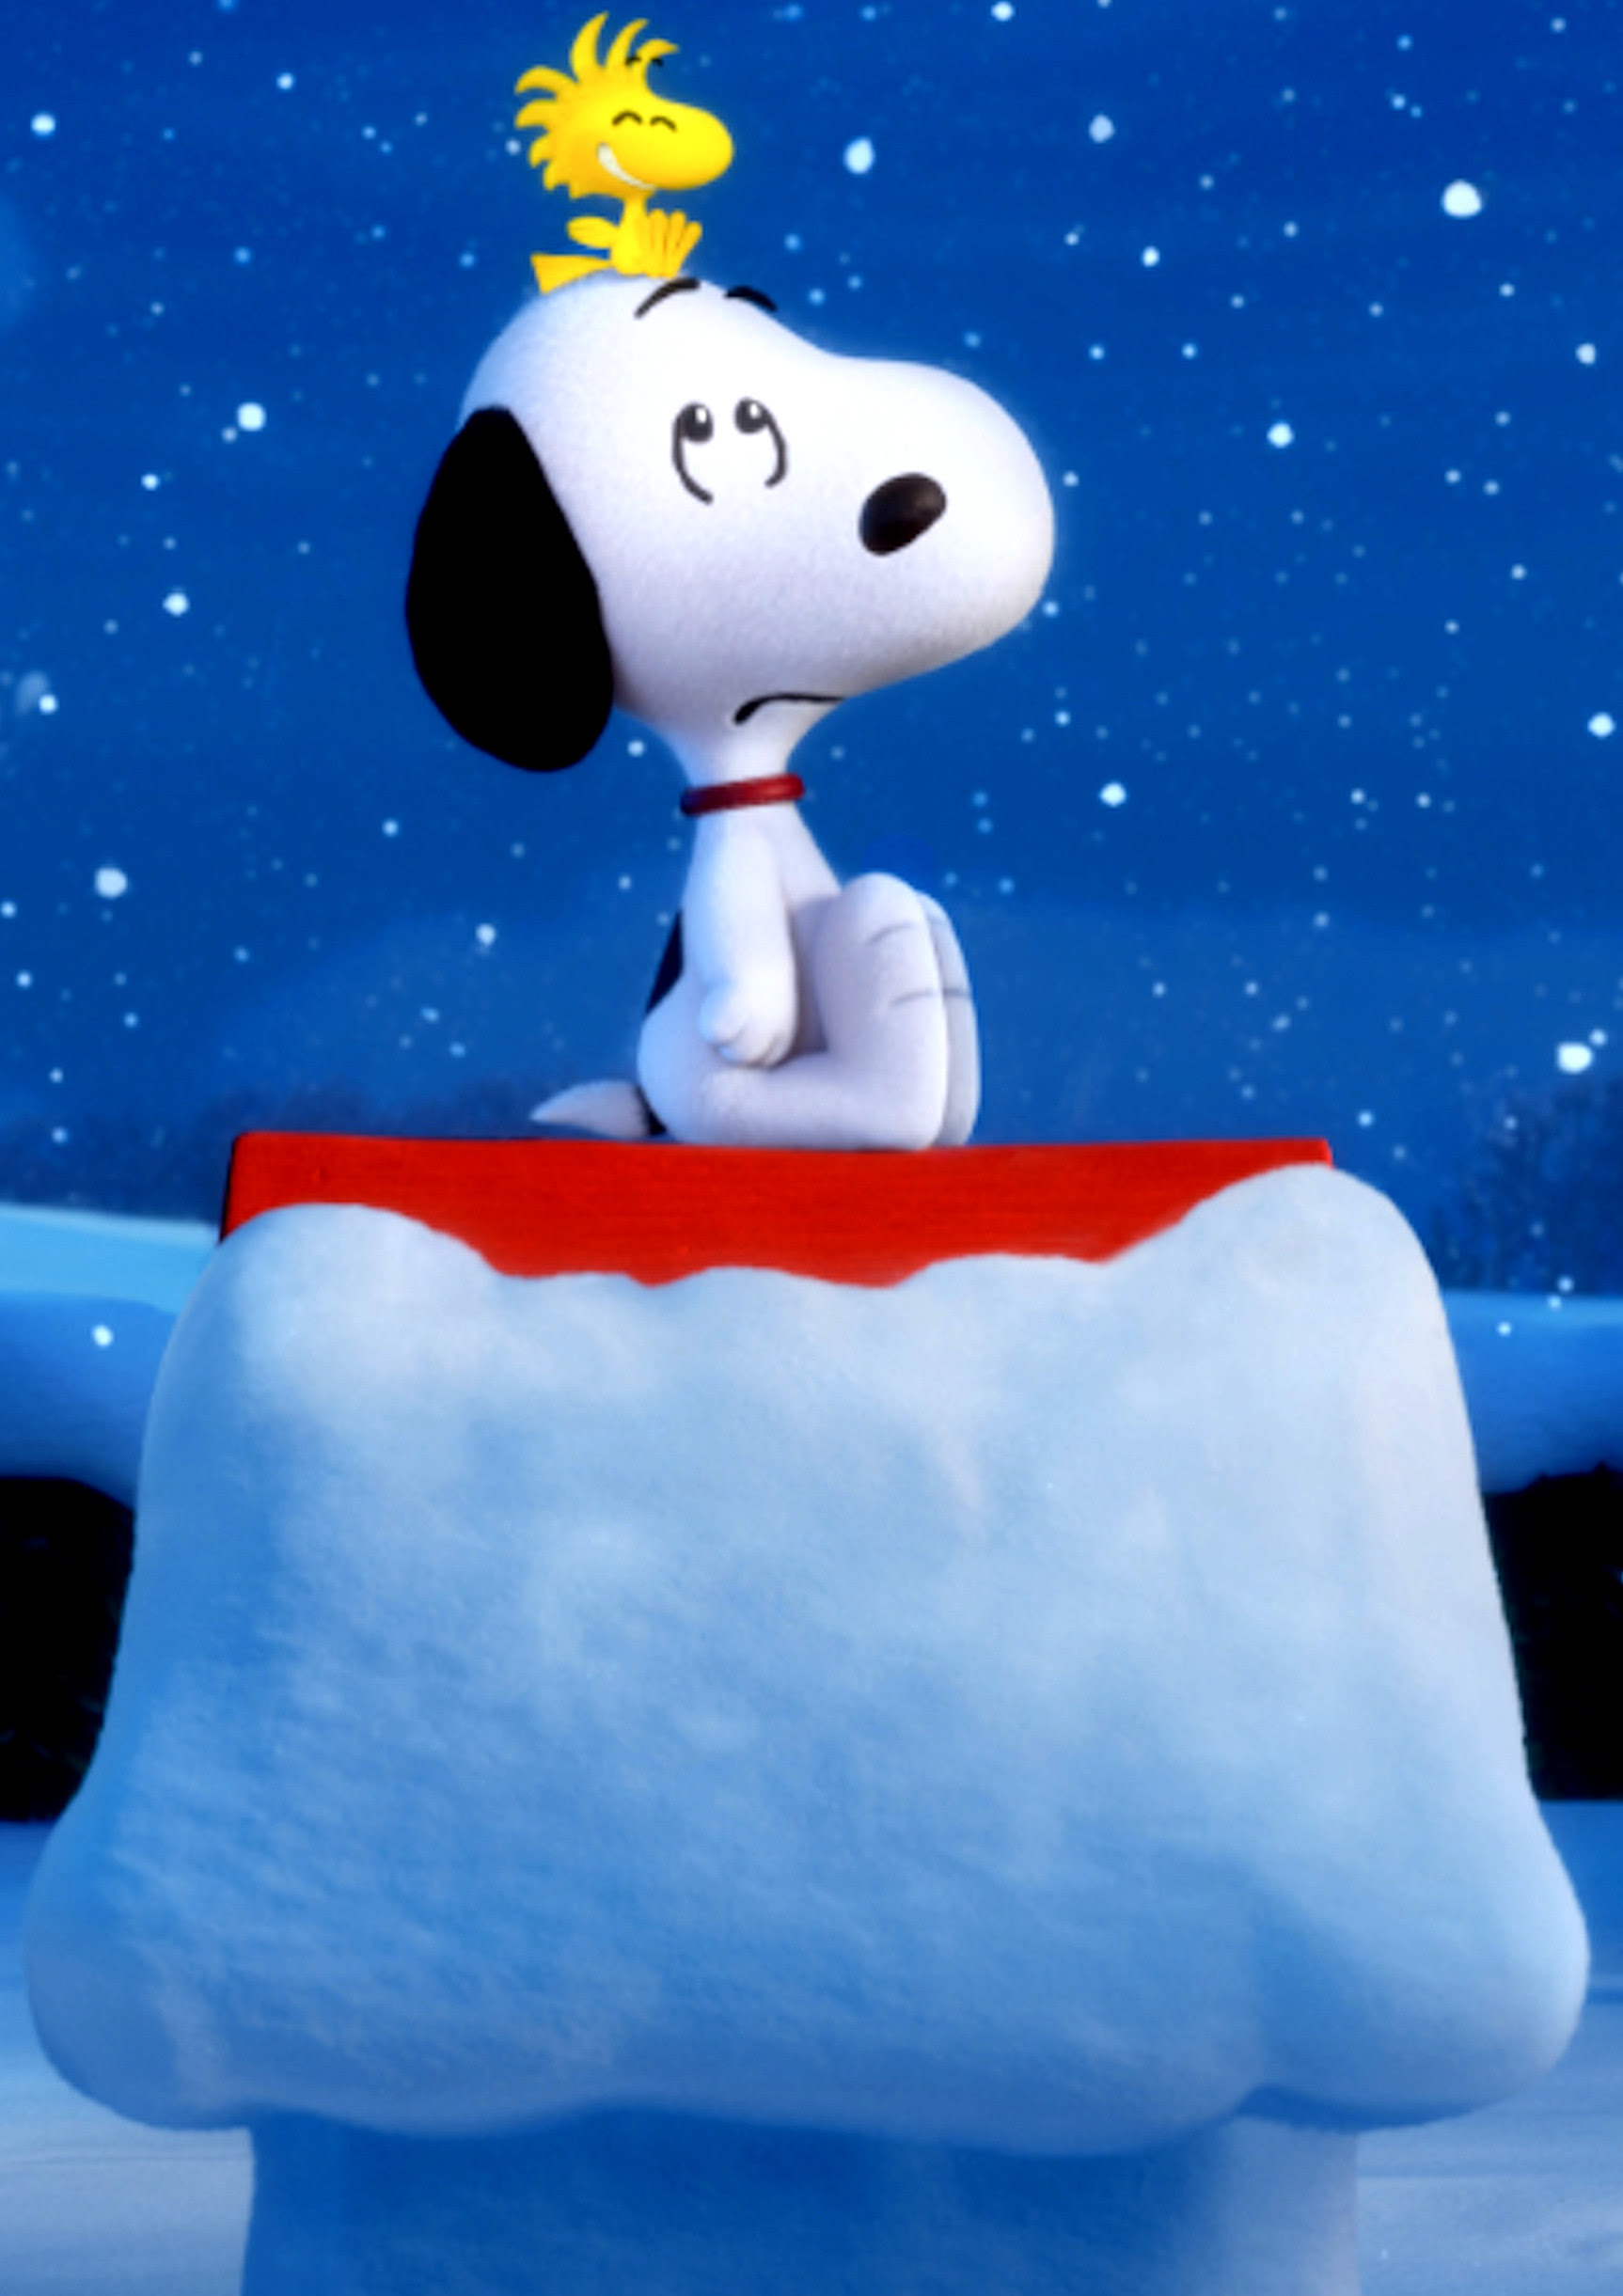 Snoopy Winter iPhone Wallpaper Basty